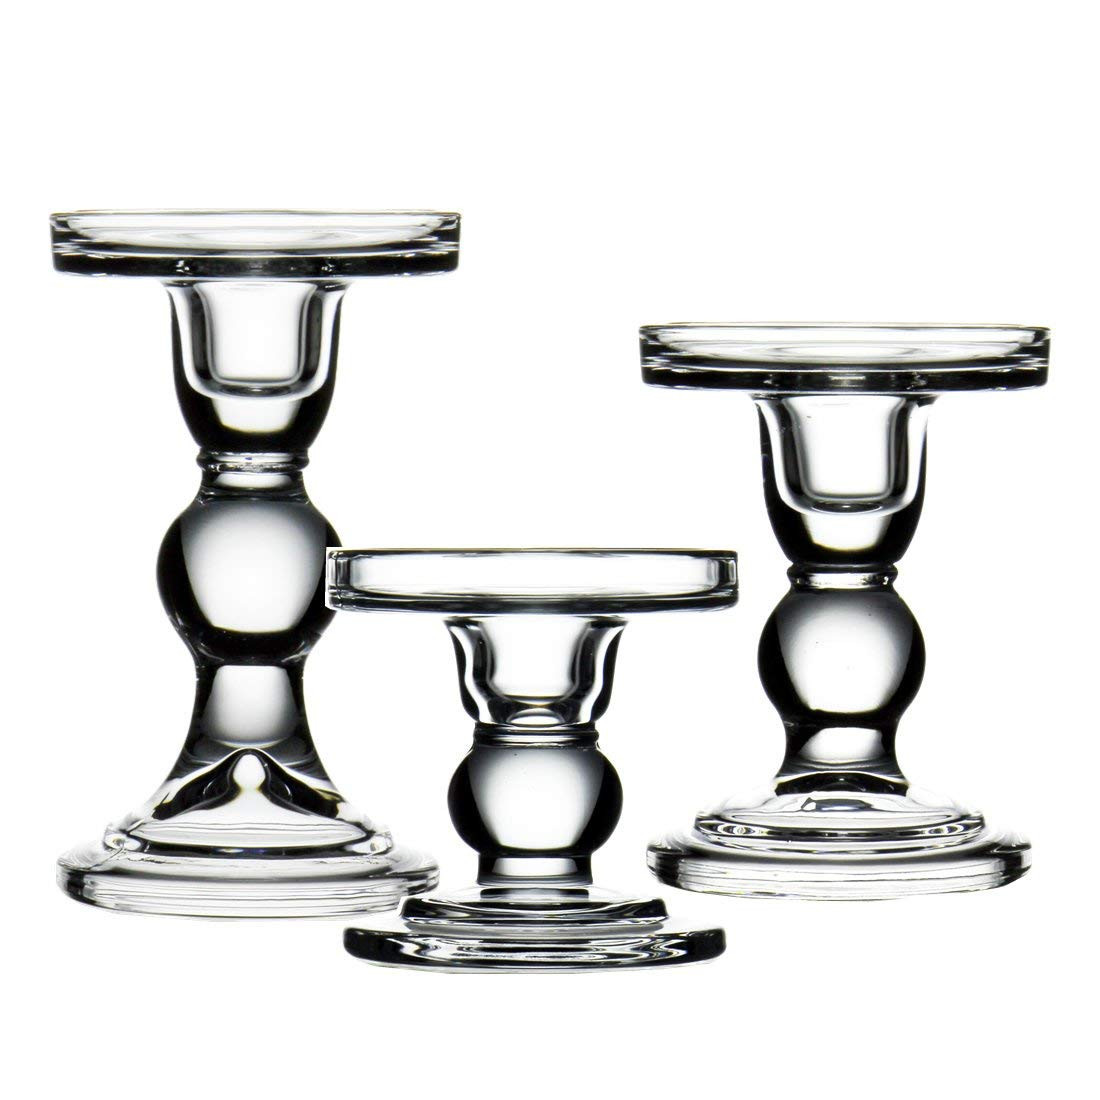 26 Recommended Mercury Glass Pedestal Vase 2024 free download mercury glass pedestal vase of amazon com cys excel candle holder set pillar taper candles bubble inside amazon com cys excel candle holder set pillar taper candles bubble set of 3 pcs h 3 5